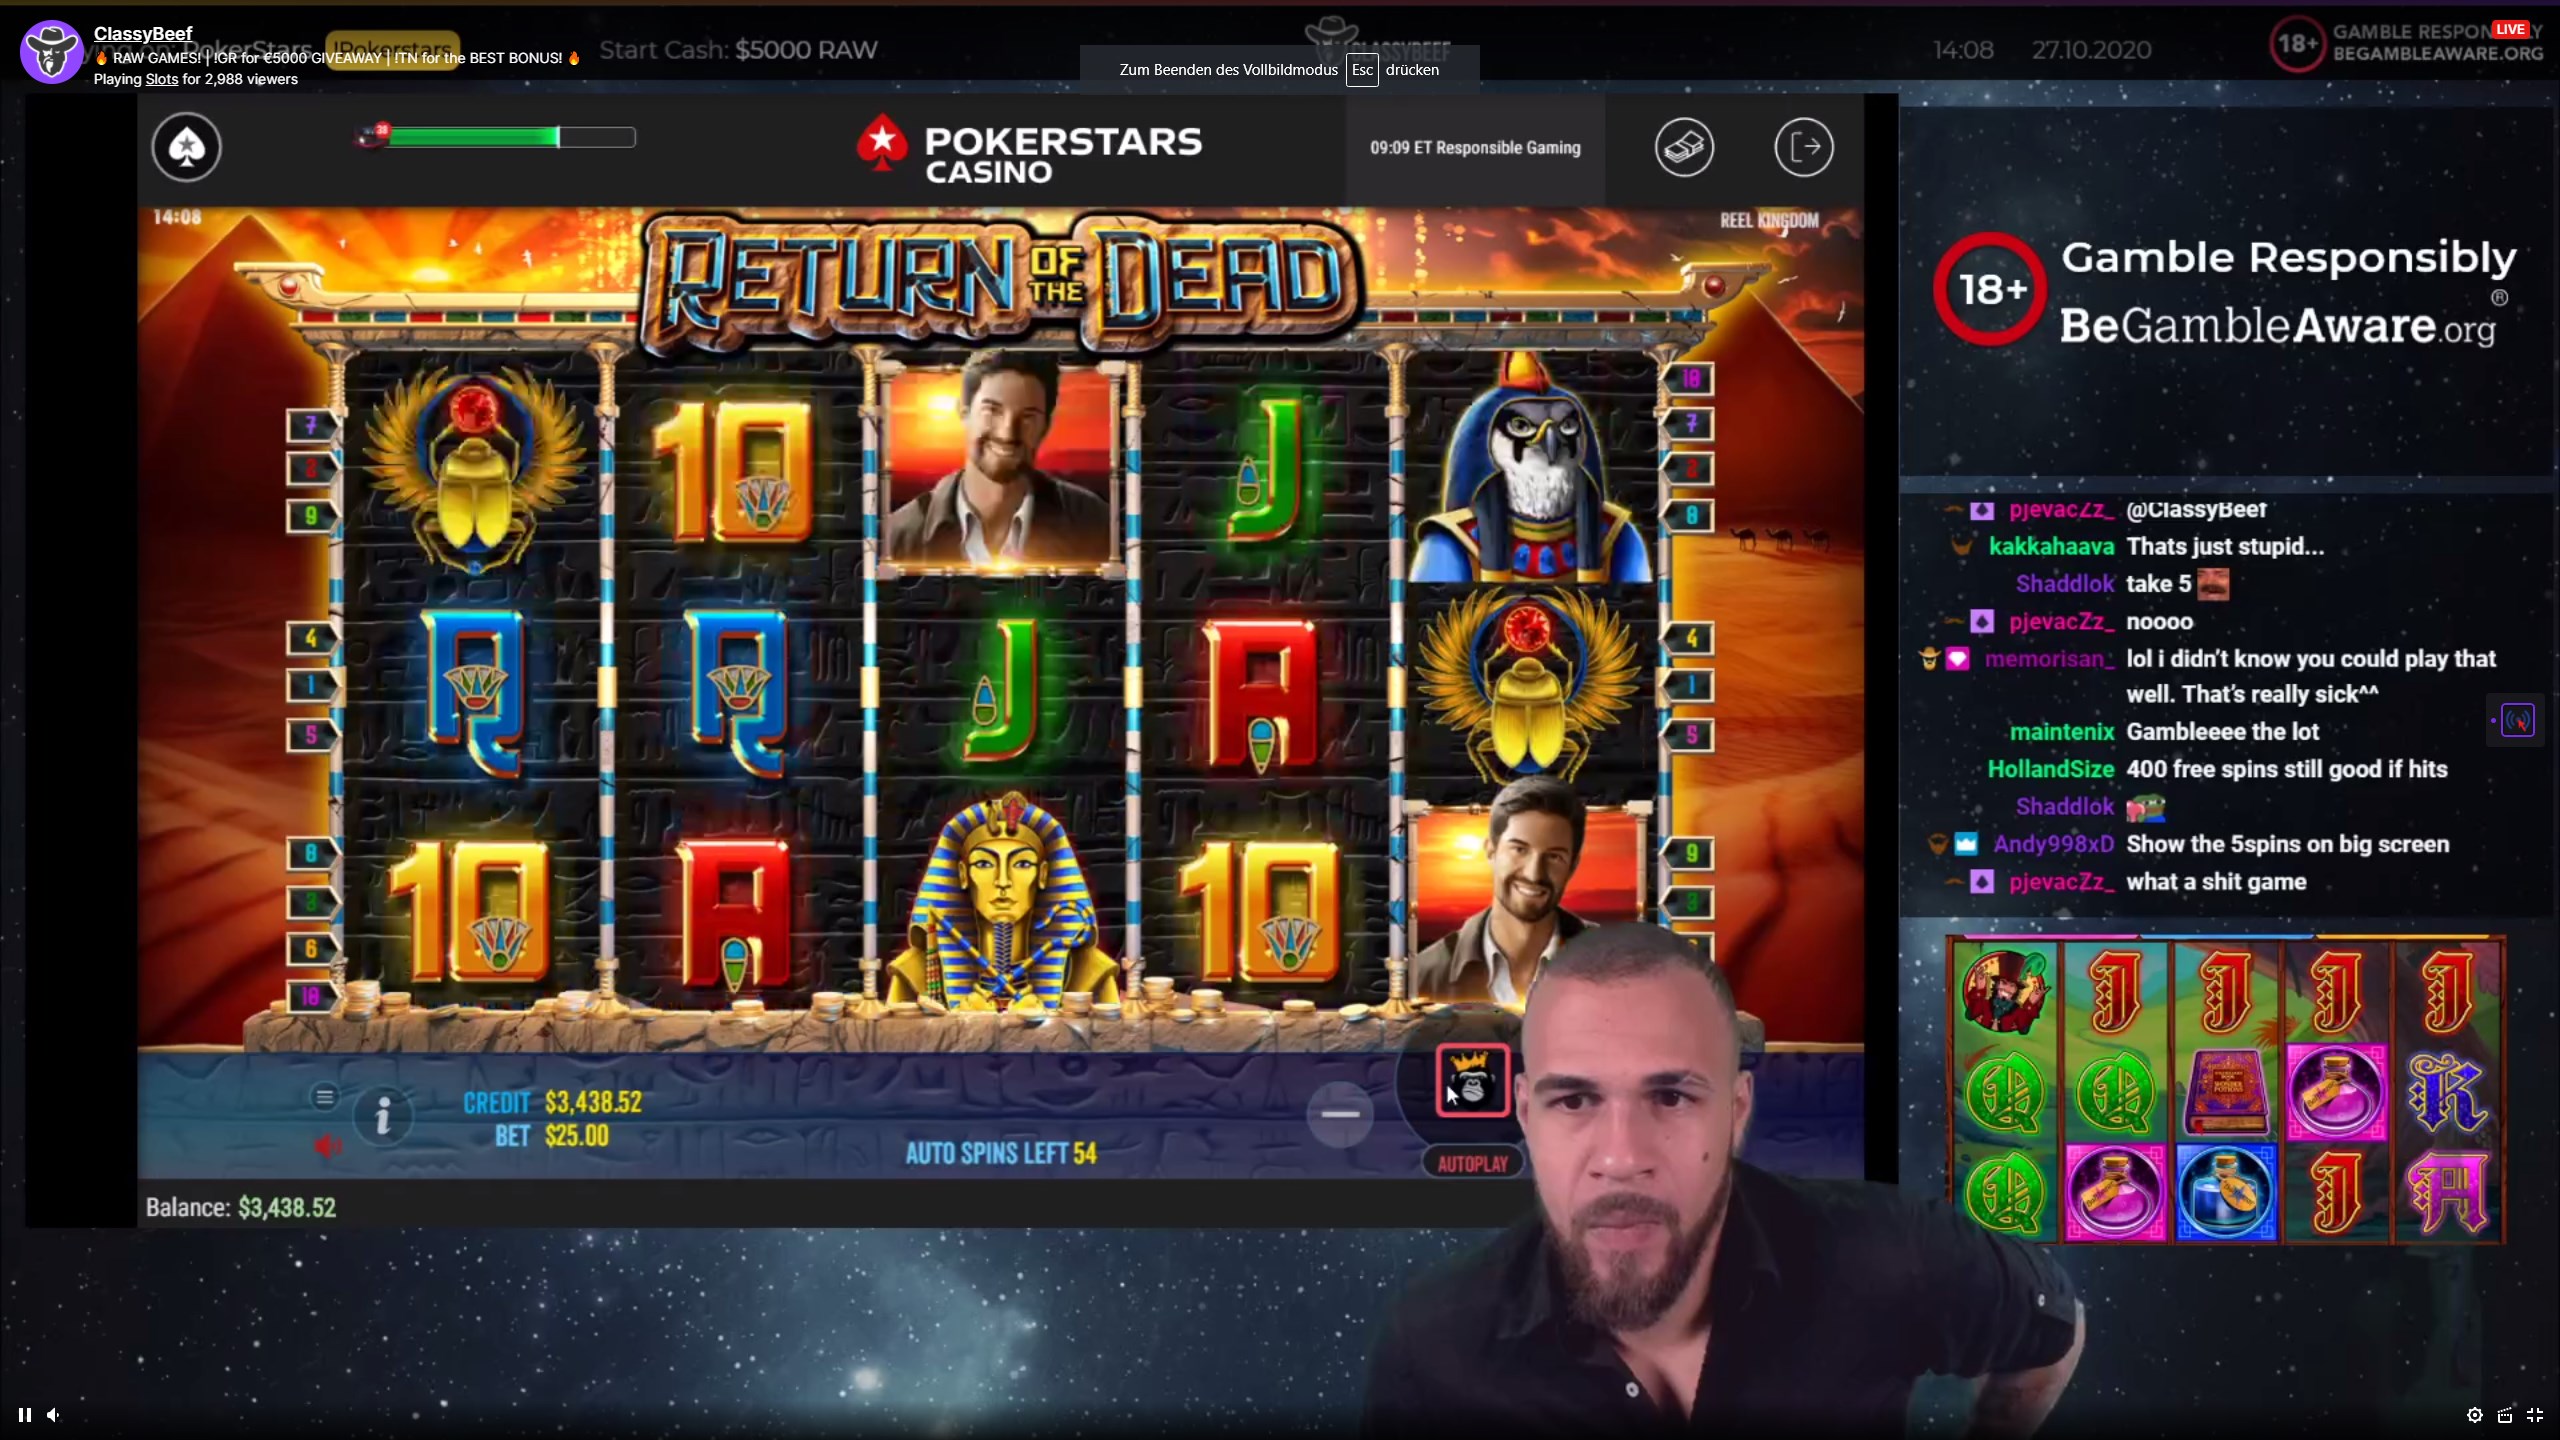 Casino Streaming on Twitch ⇒ All you need to know!